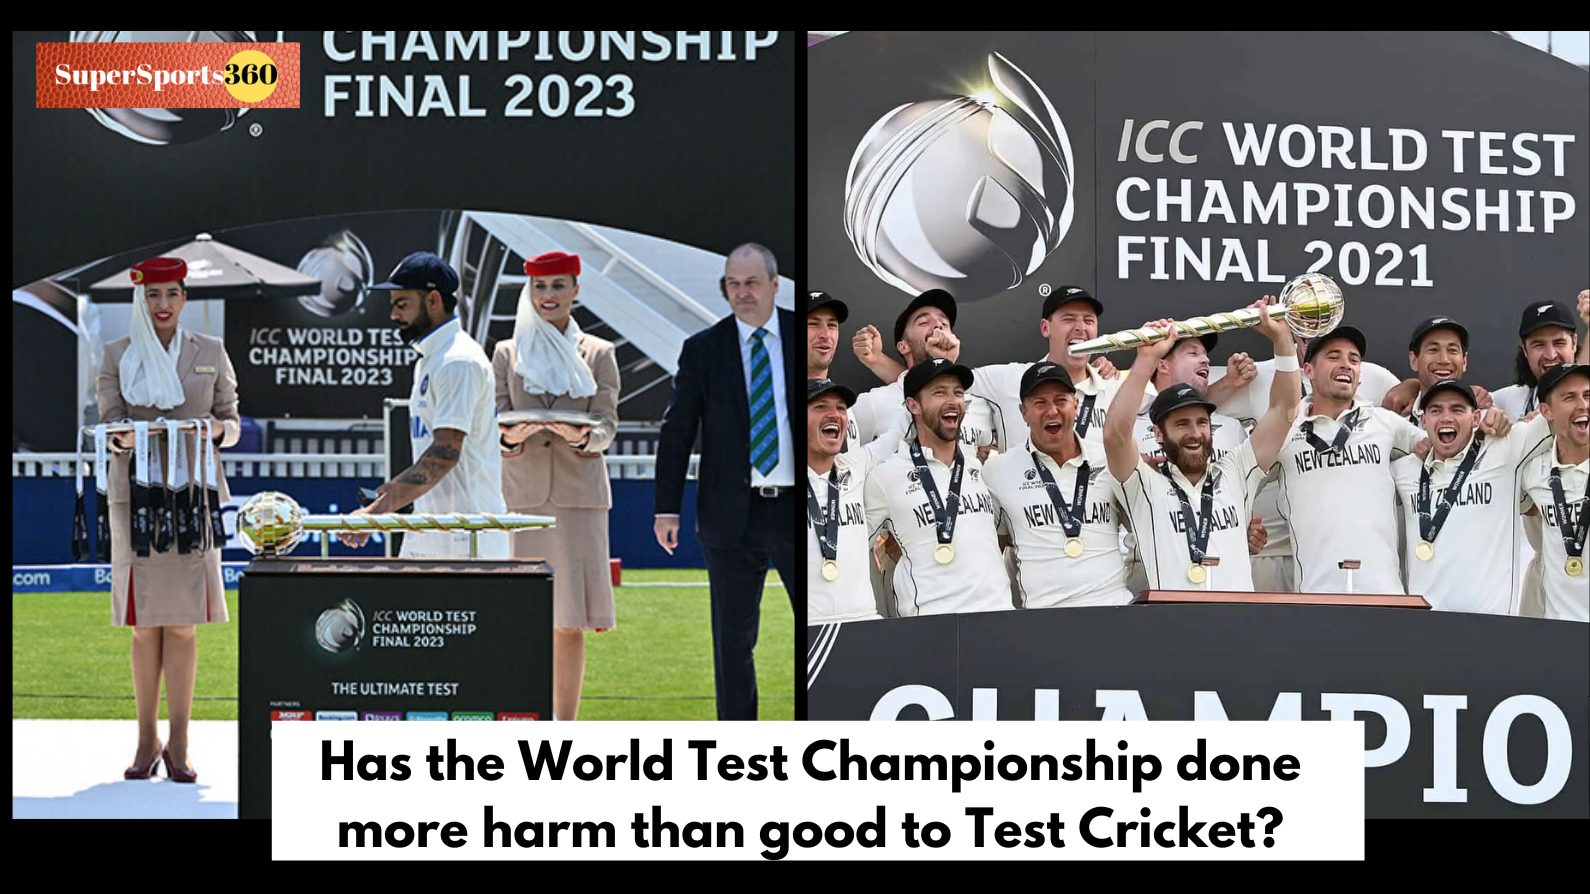 Has the World Test Championship done more harm than good to Test Cricket?